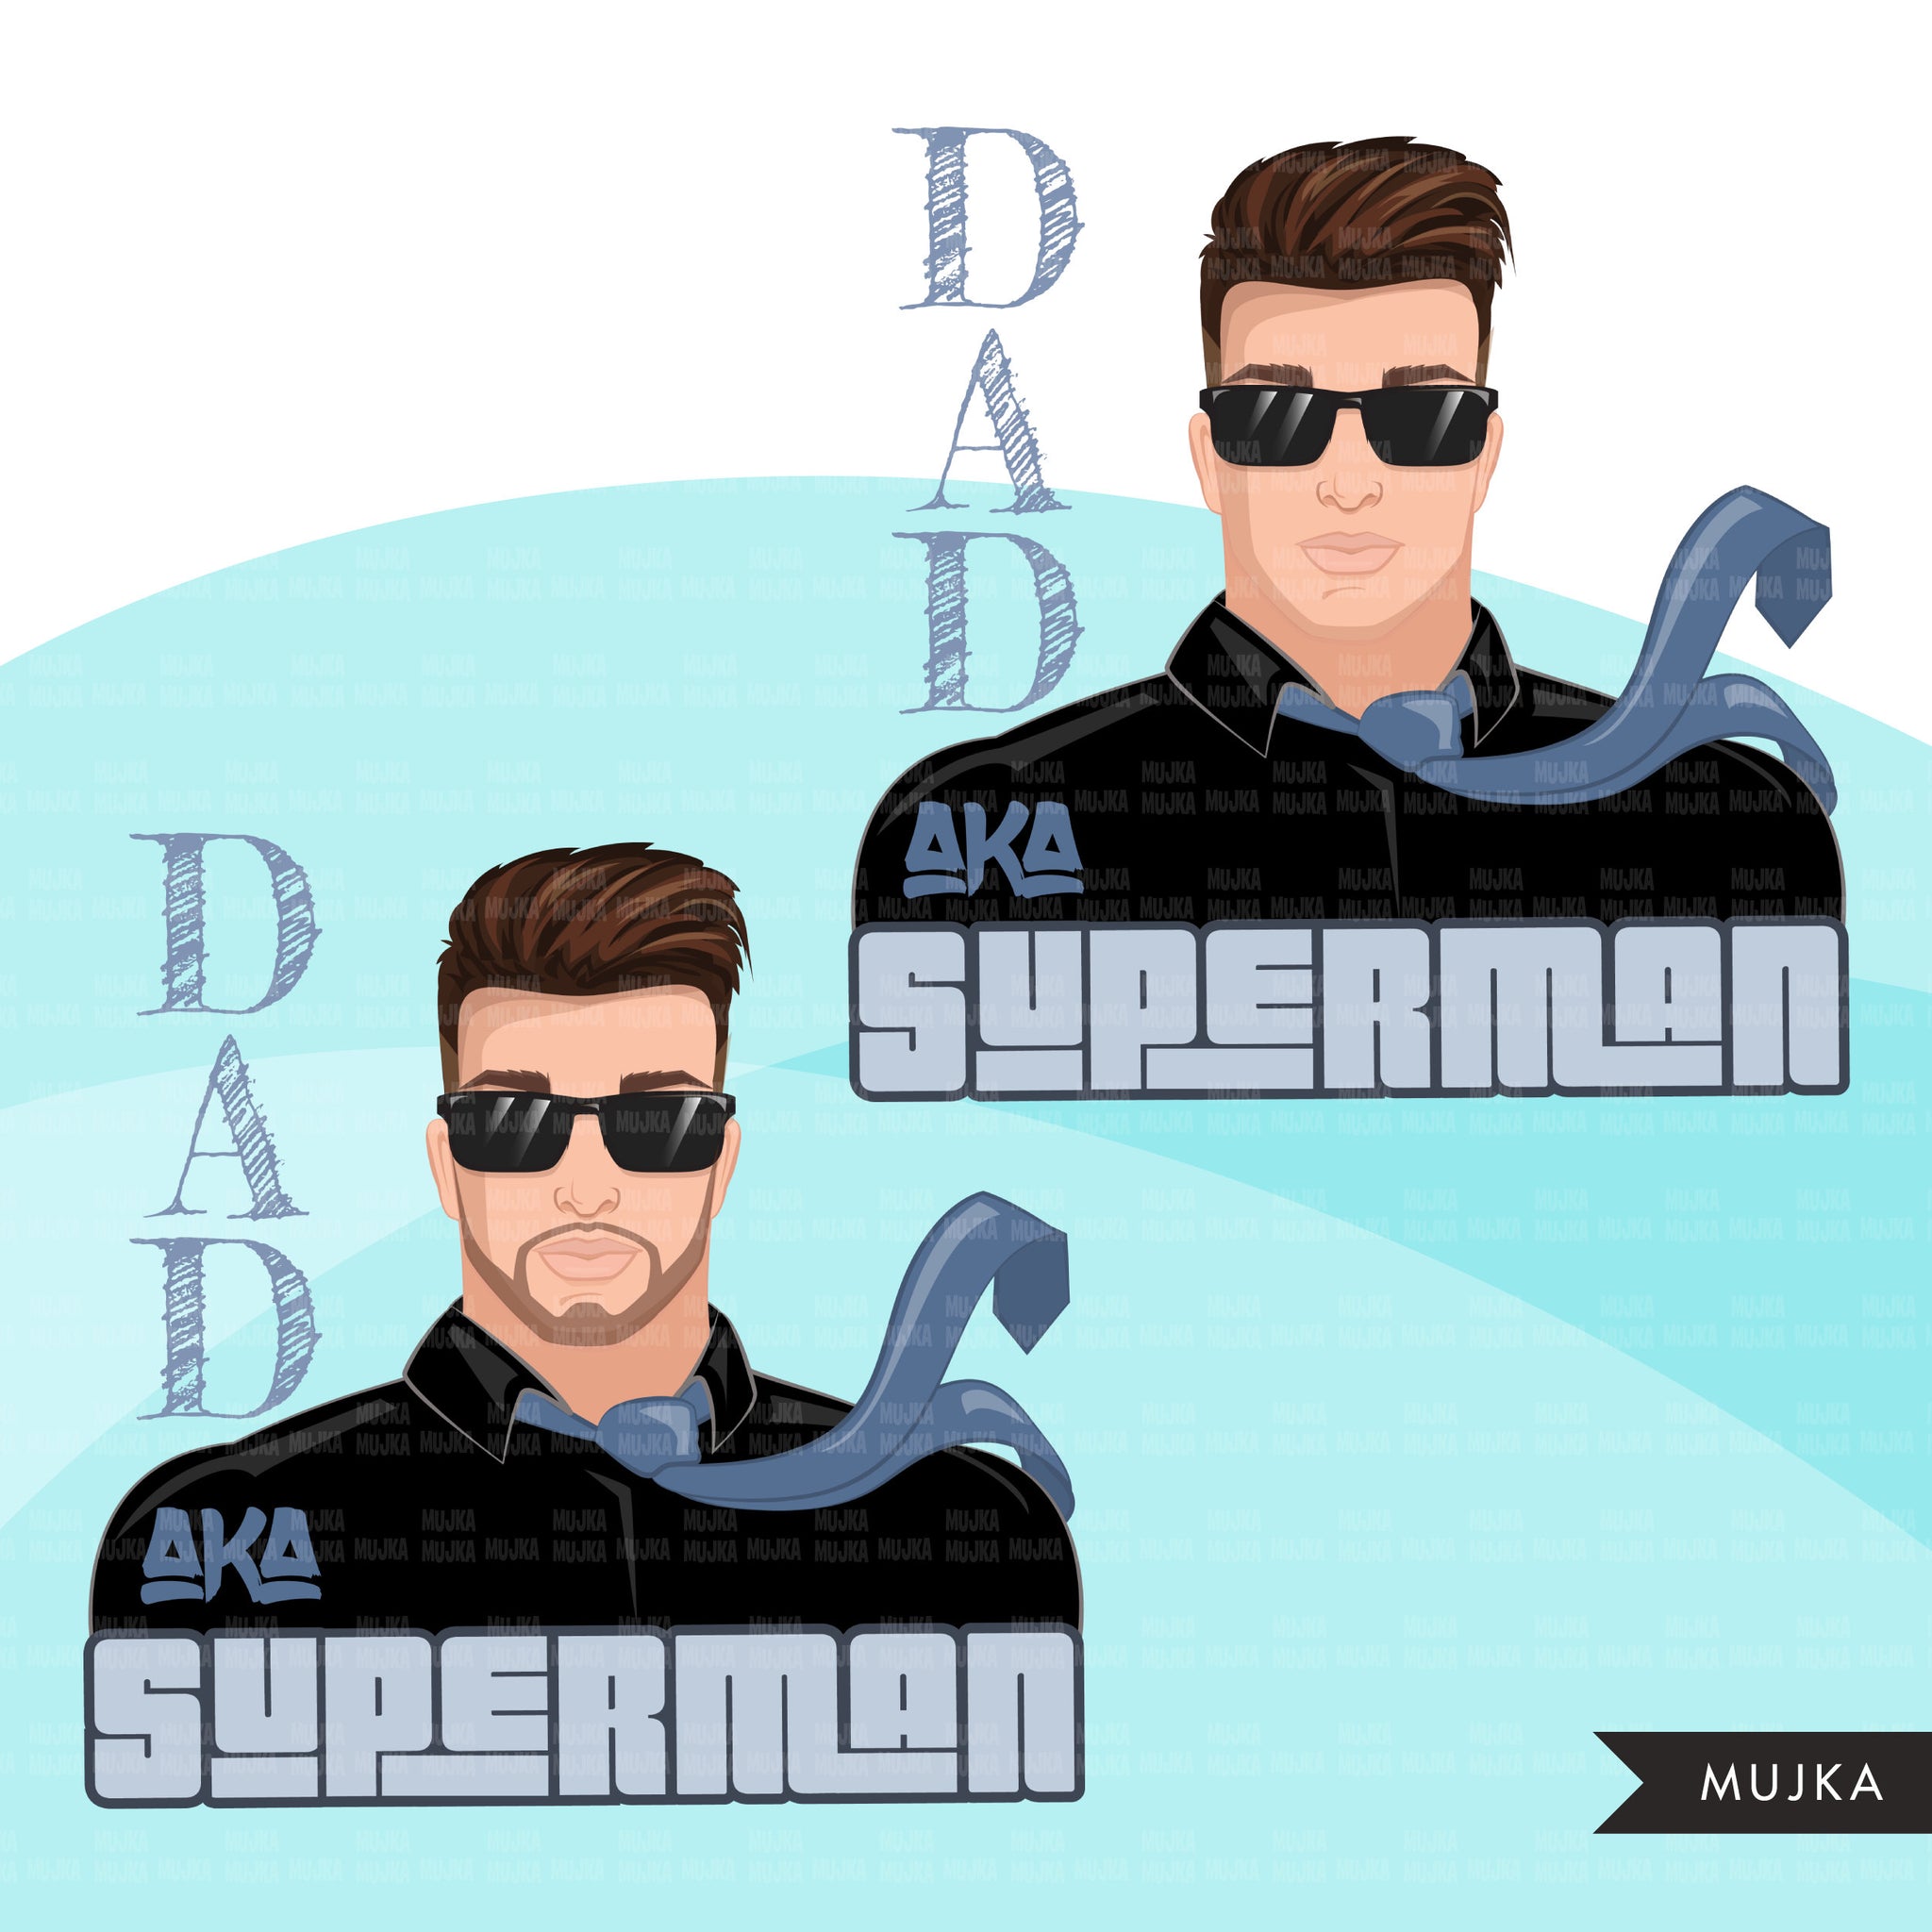 Father's Day clipart, fathers day sublimation designs, man with goatee, dad shirt, Dad aka superman, shirt graphics png